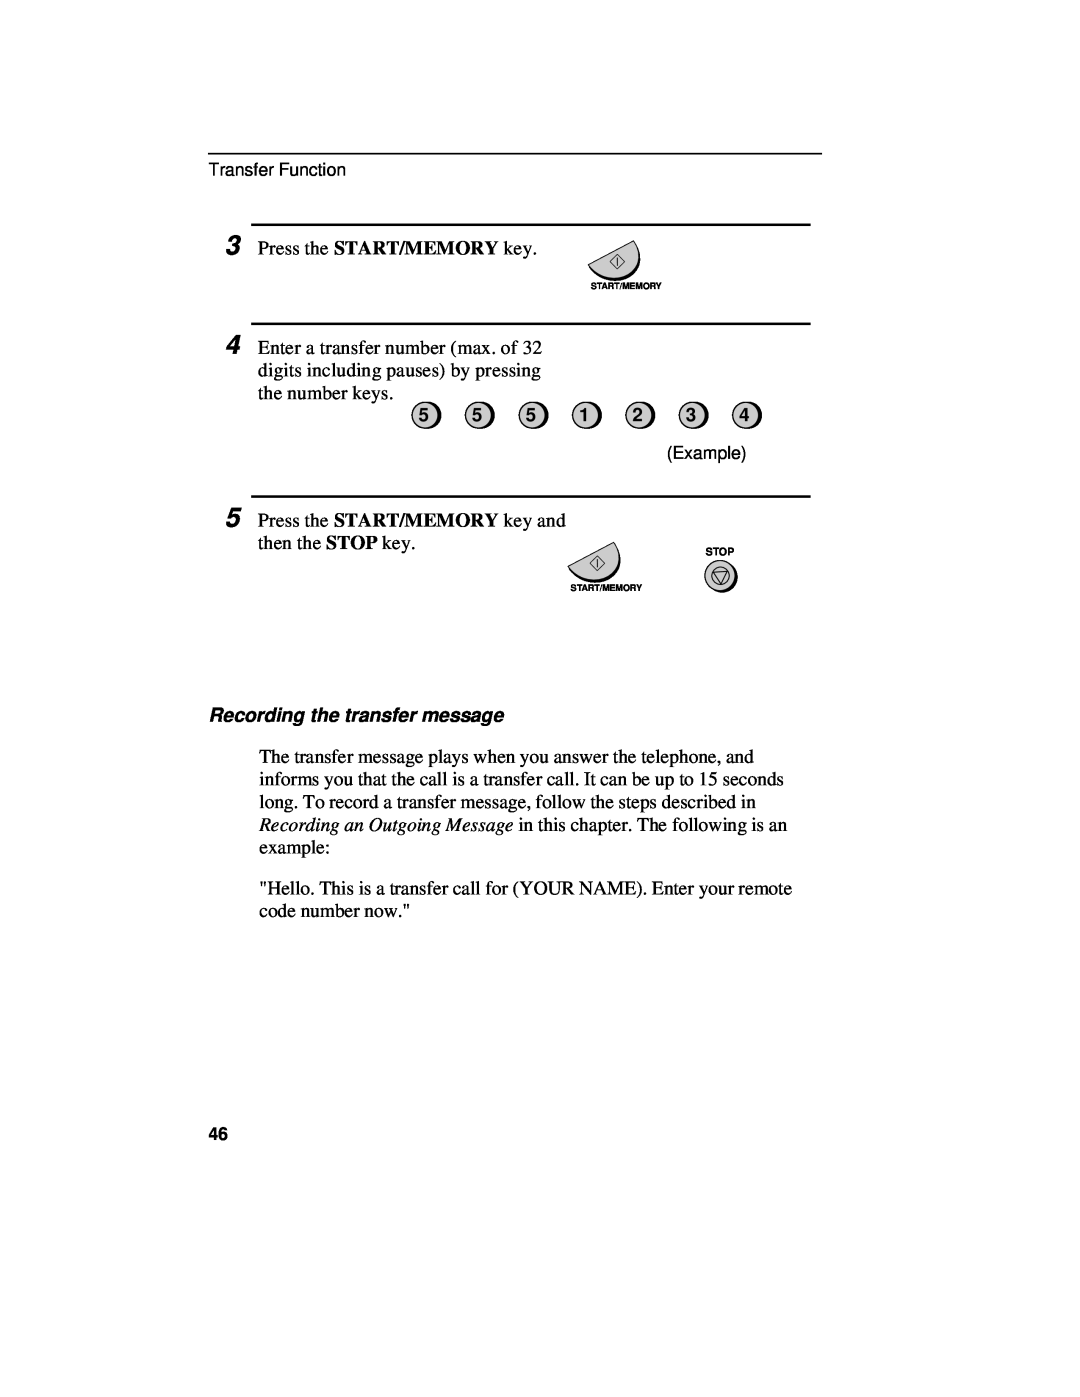 Sharp UX-460 operation manual Recording the transfer message 